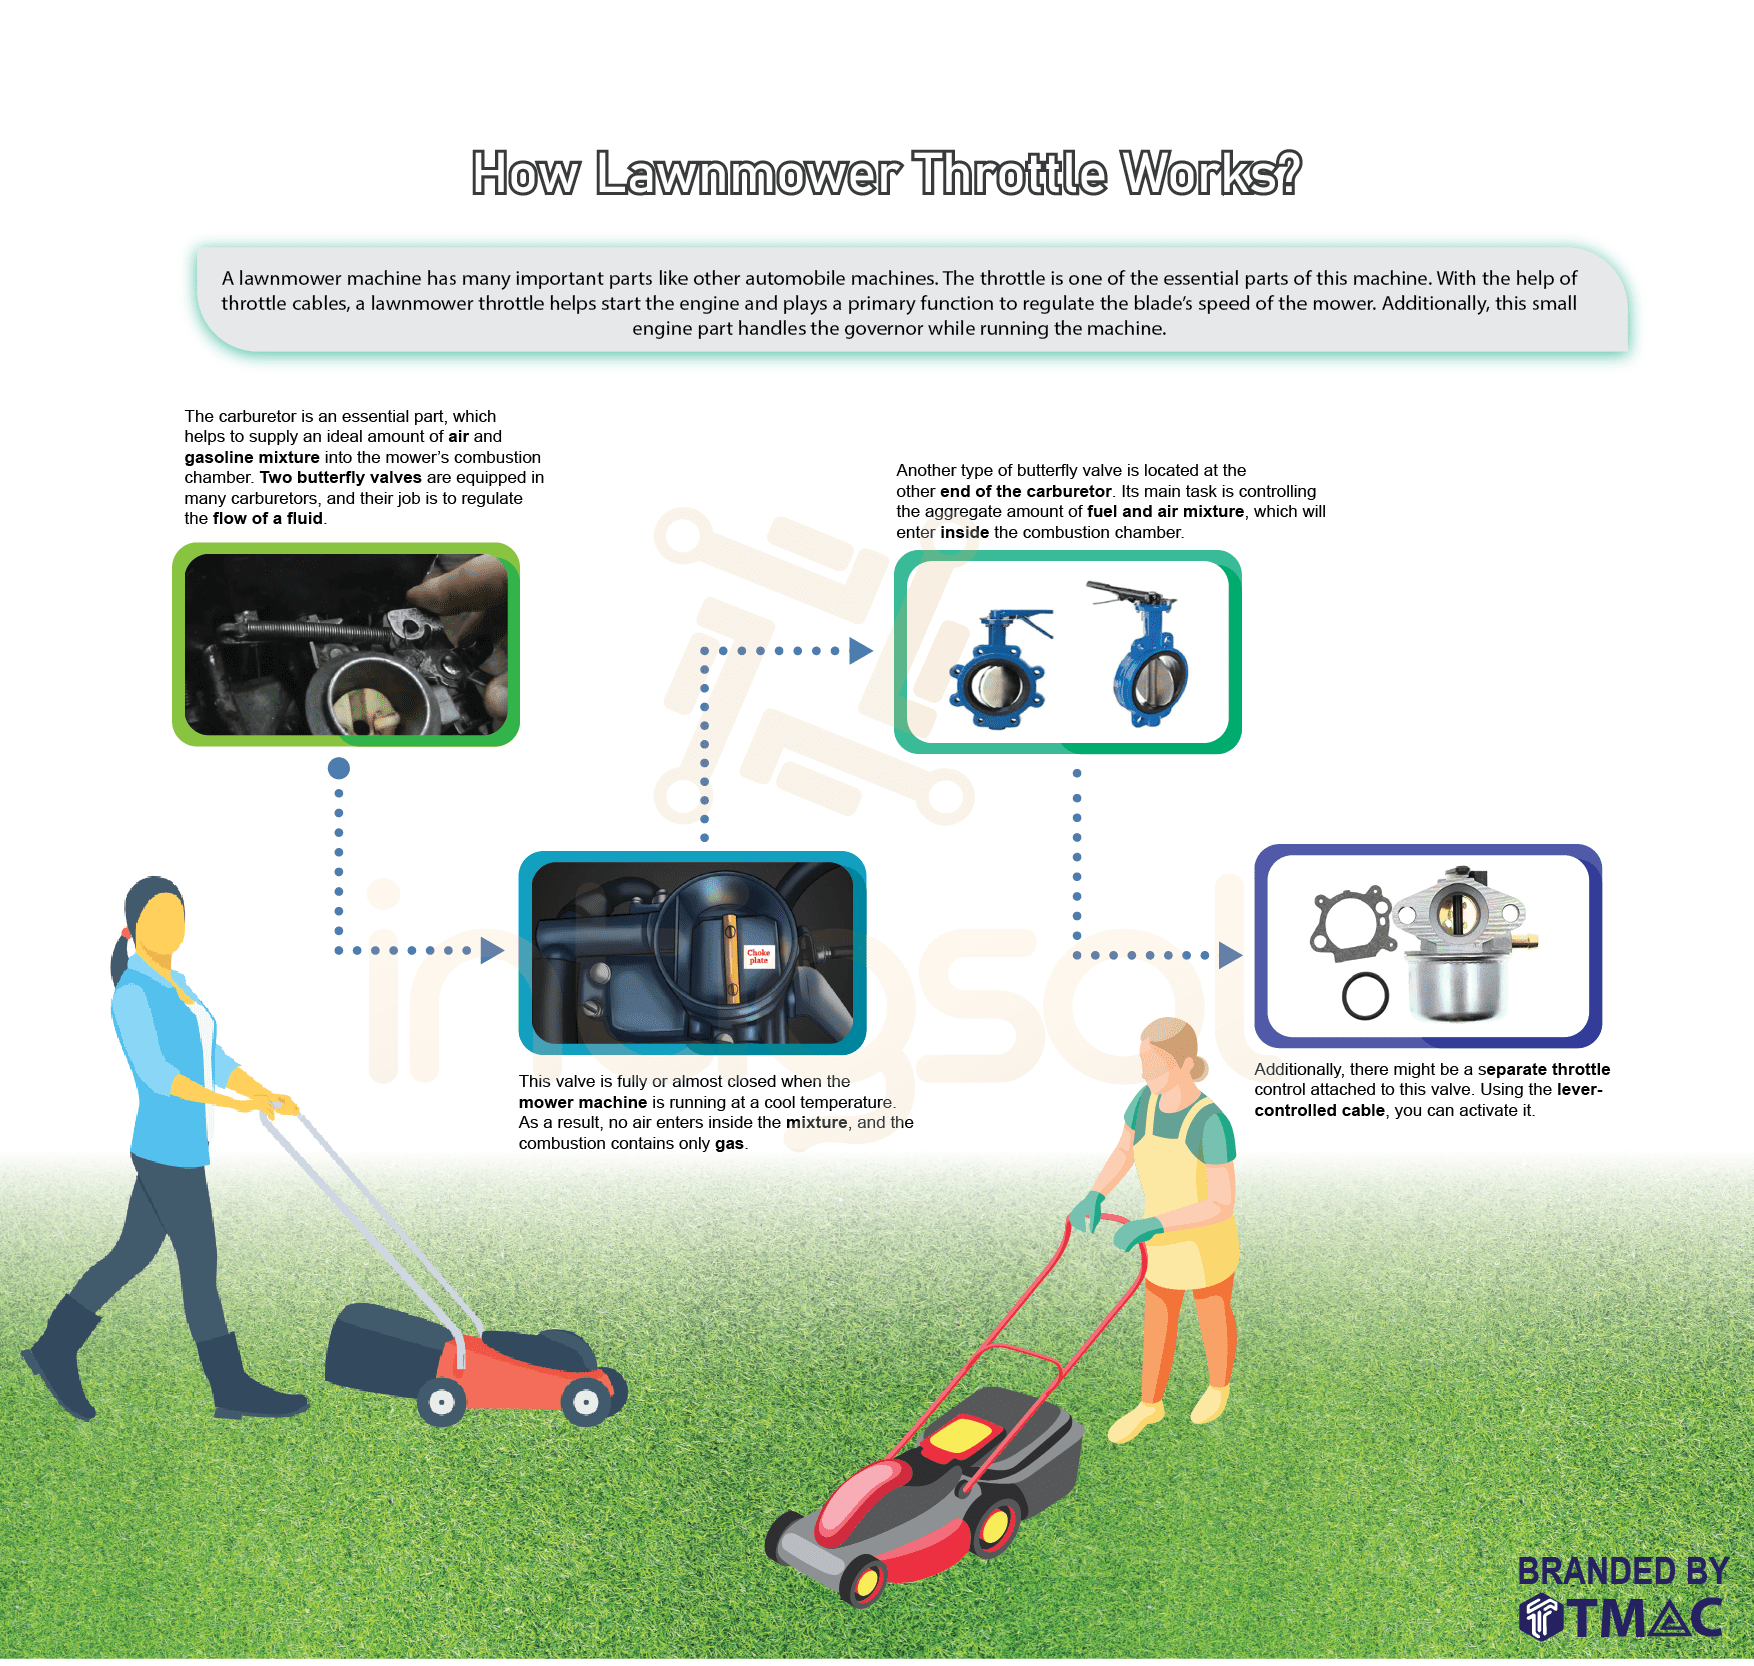 how does lawnmower throttle work infographic